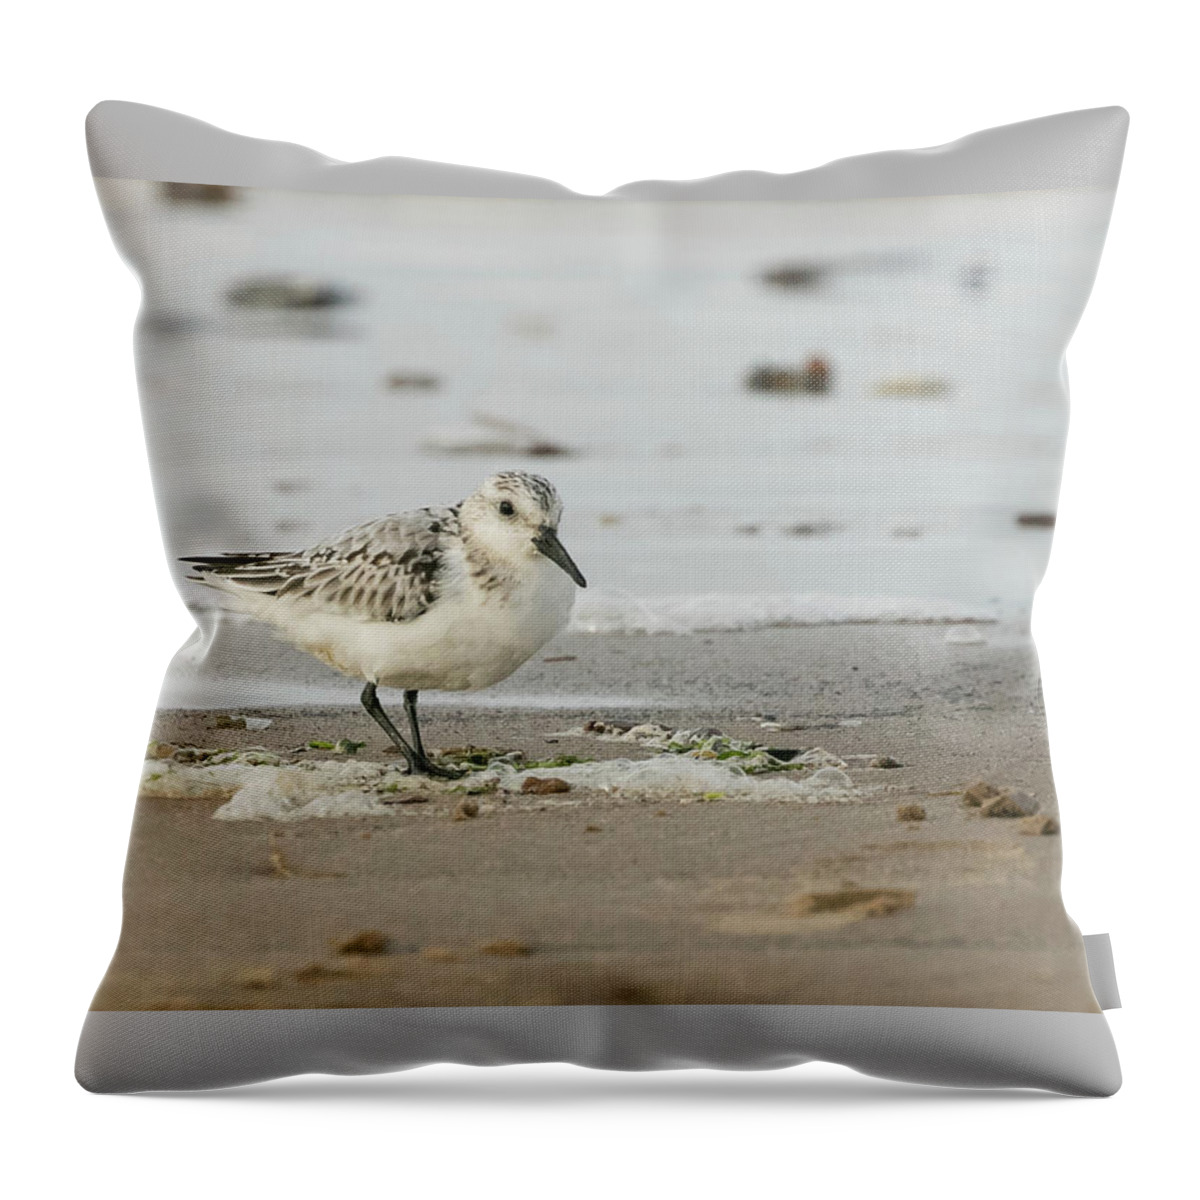 Flyladyphotographybywendycooper Throw Pillow featuring the photograph Sanderling by Wendy Cooper